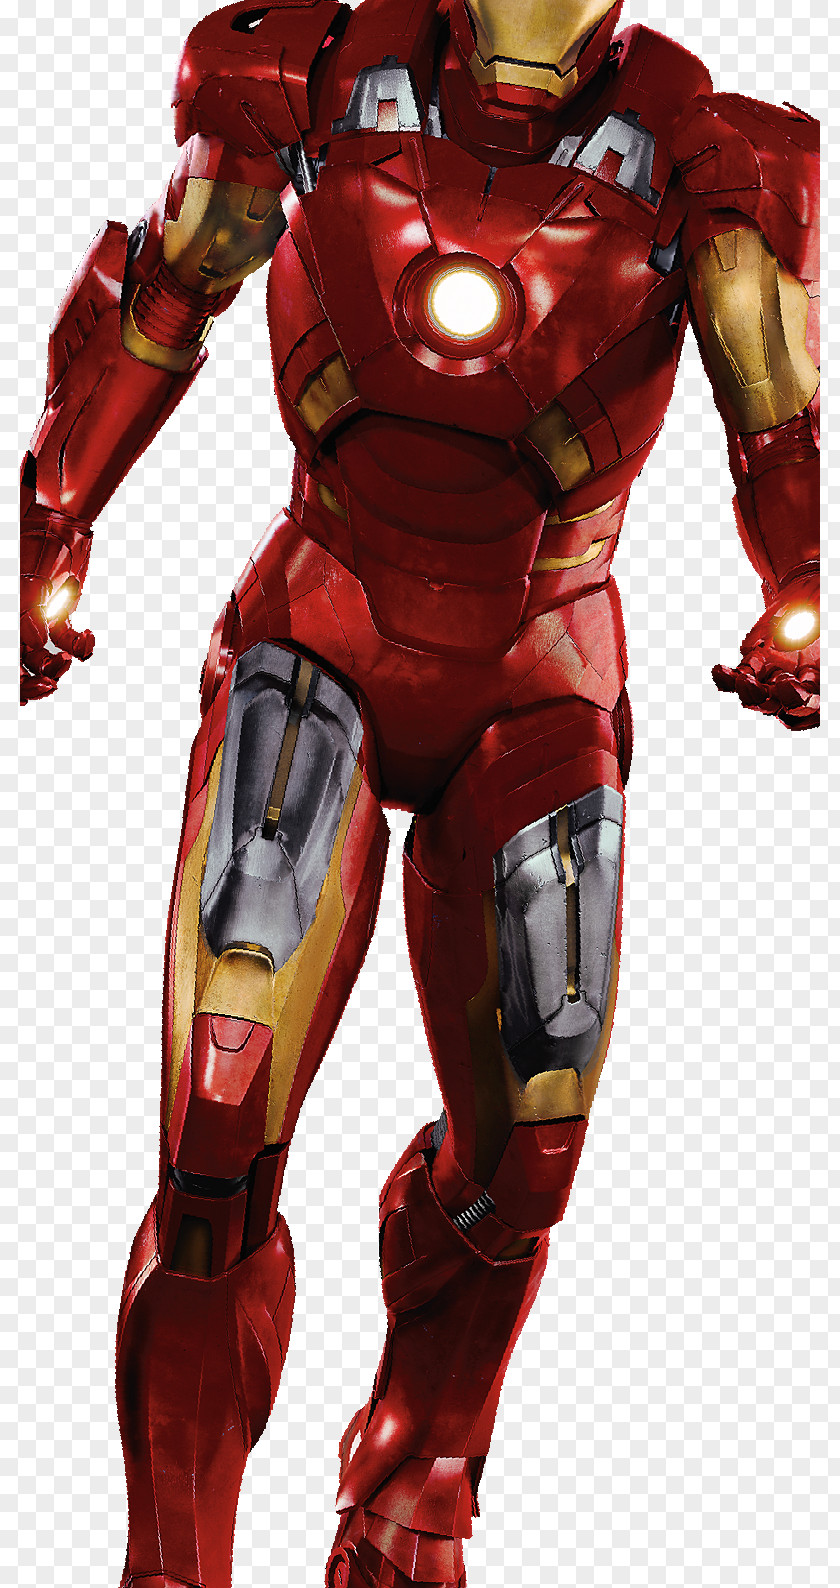 Ironman Iron Man Superhero Action & Toy Figures Back To The Future Printing PNG